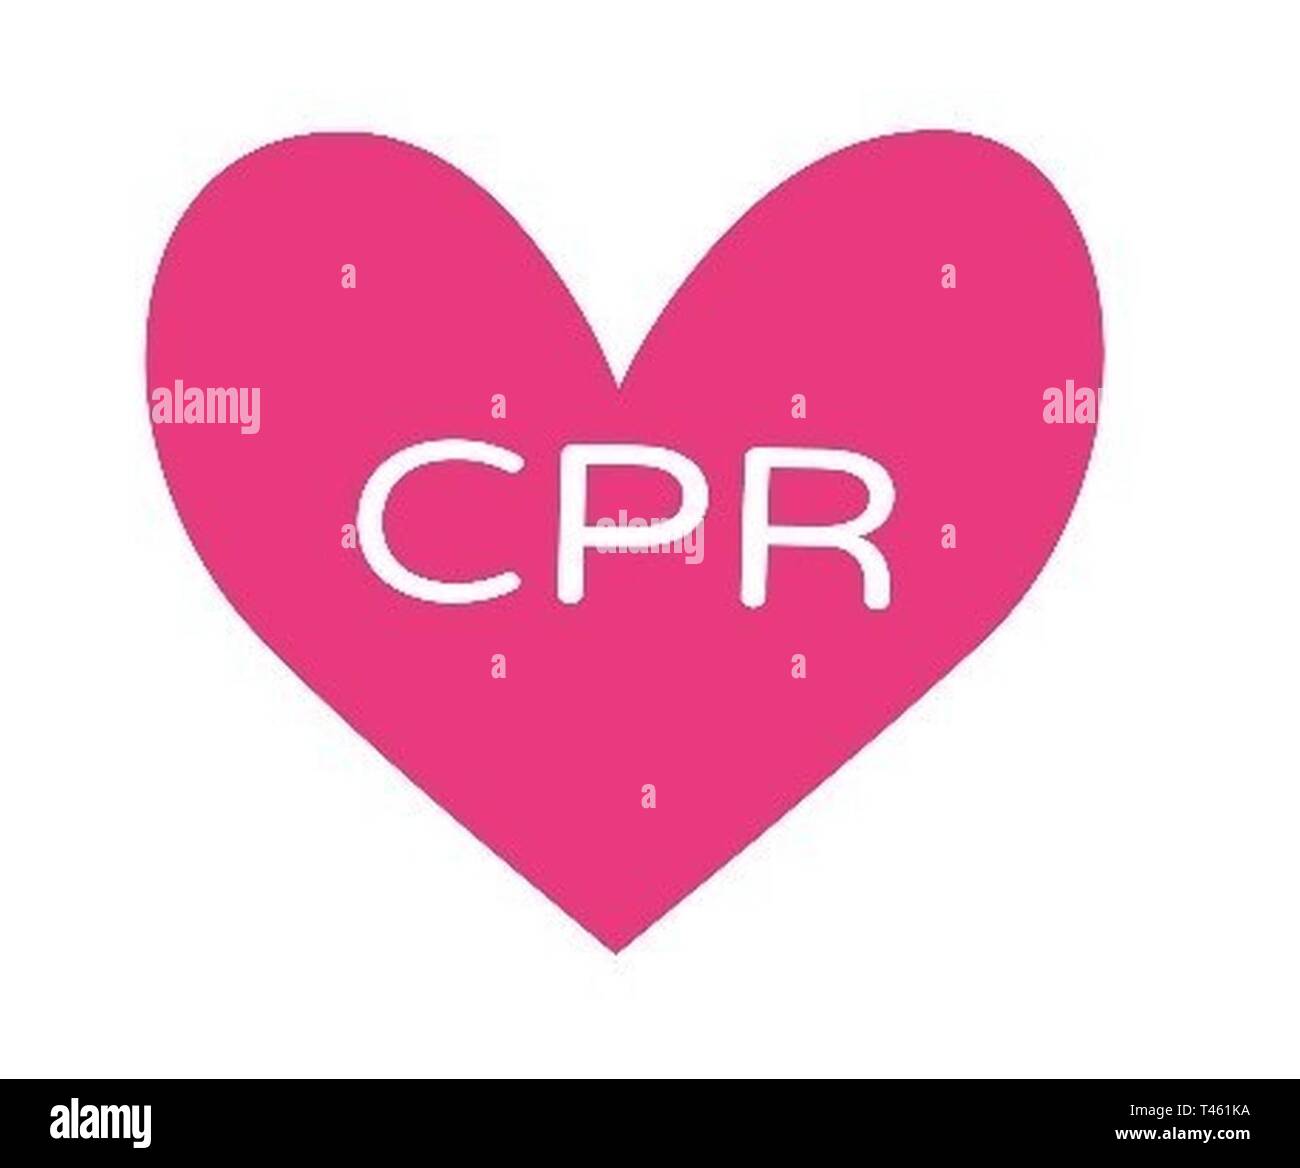 U.S. Army Maj. Rick Connolly, an Army Nurse who also served as a paramedic for several years, thinks that Cardiopulmonary Resuscitation, more commonly known as CPR, is something everyone can learn very easily. Stock Photo